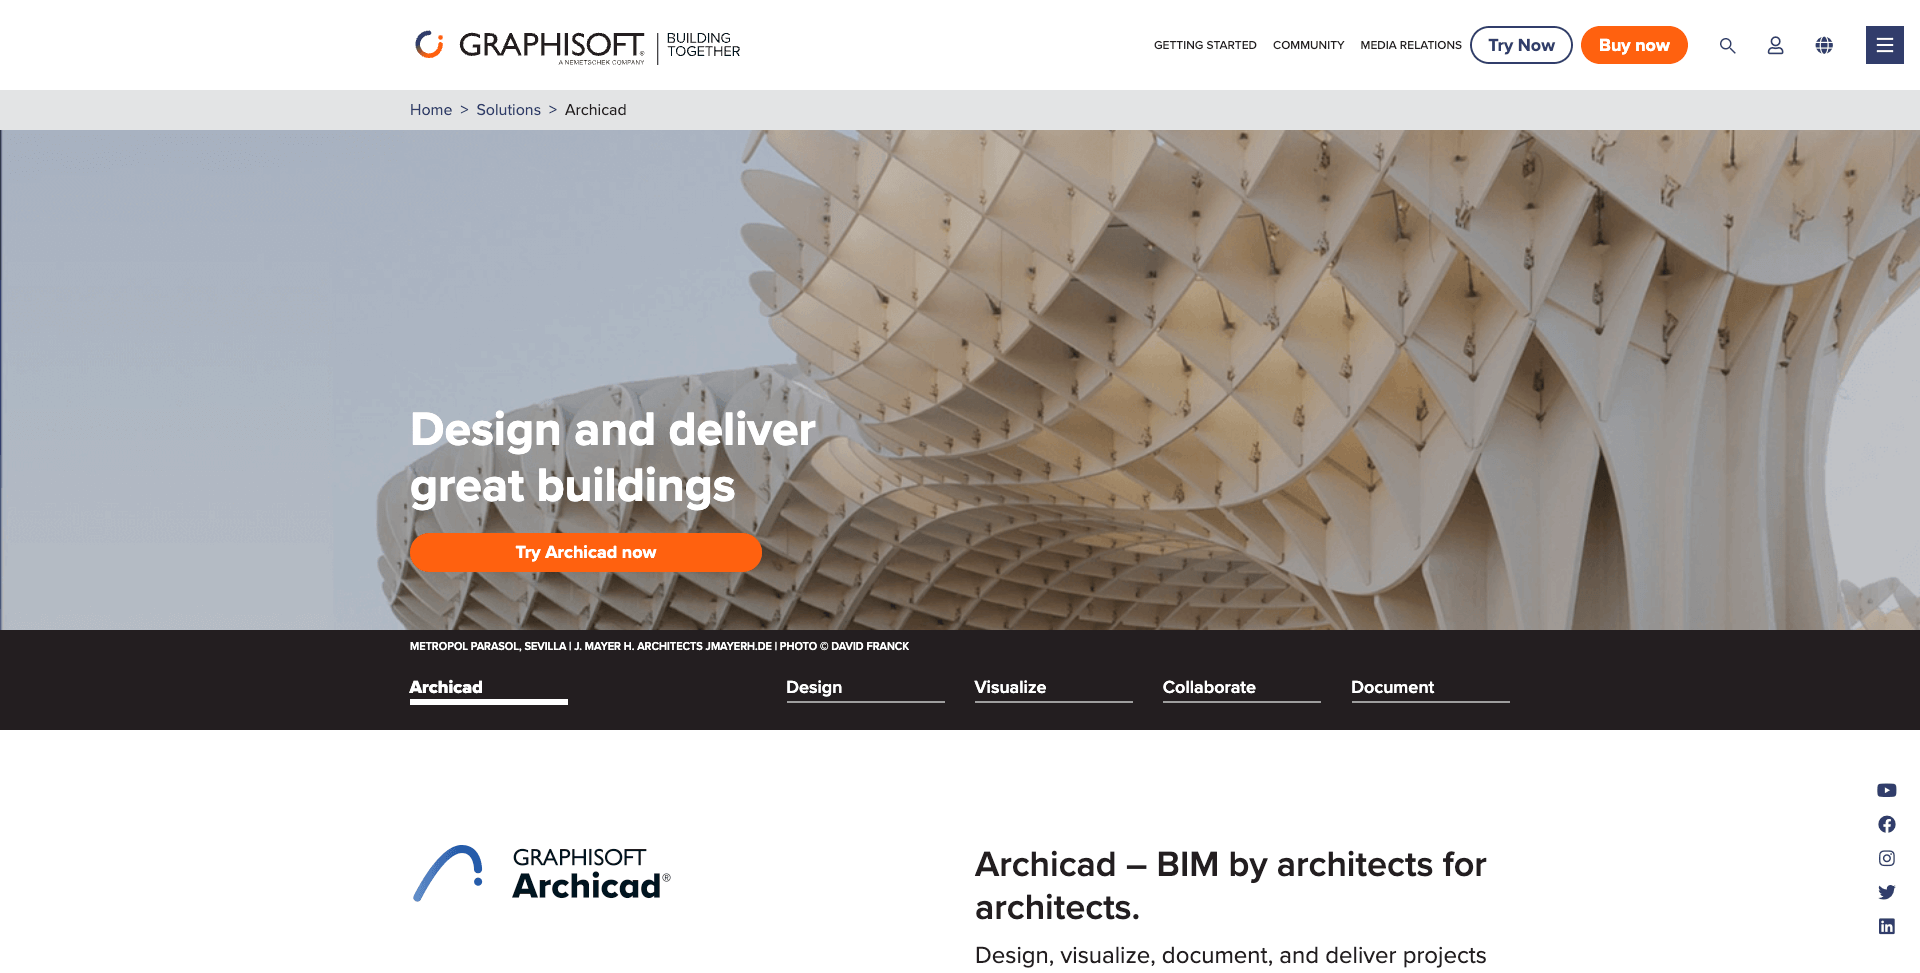 Archicad 25: Develop high-quality architecture projects using Archicad 25, which features symbol libraries for easy placement of objects. 